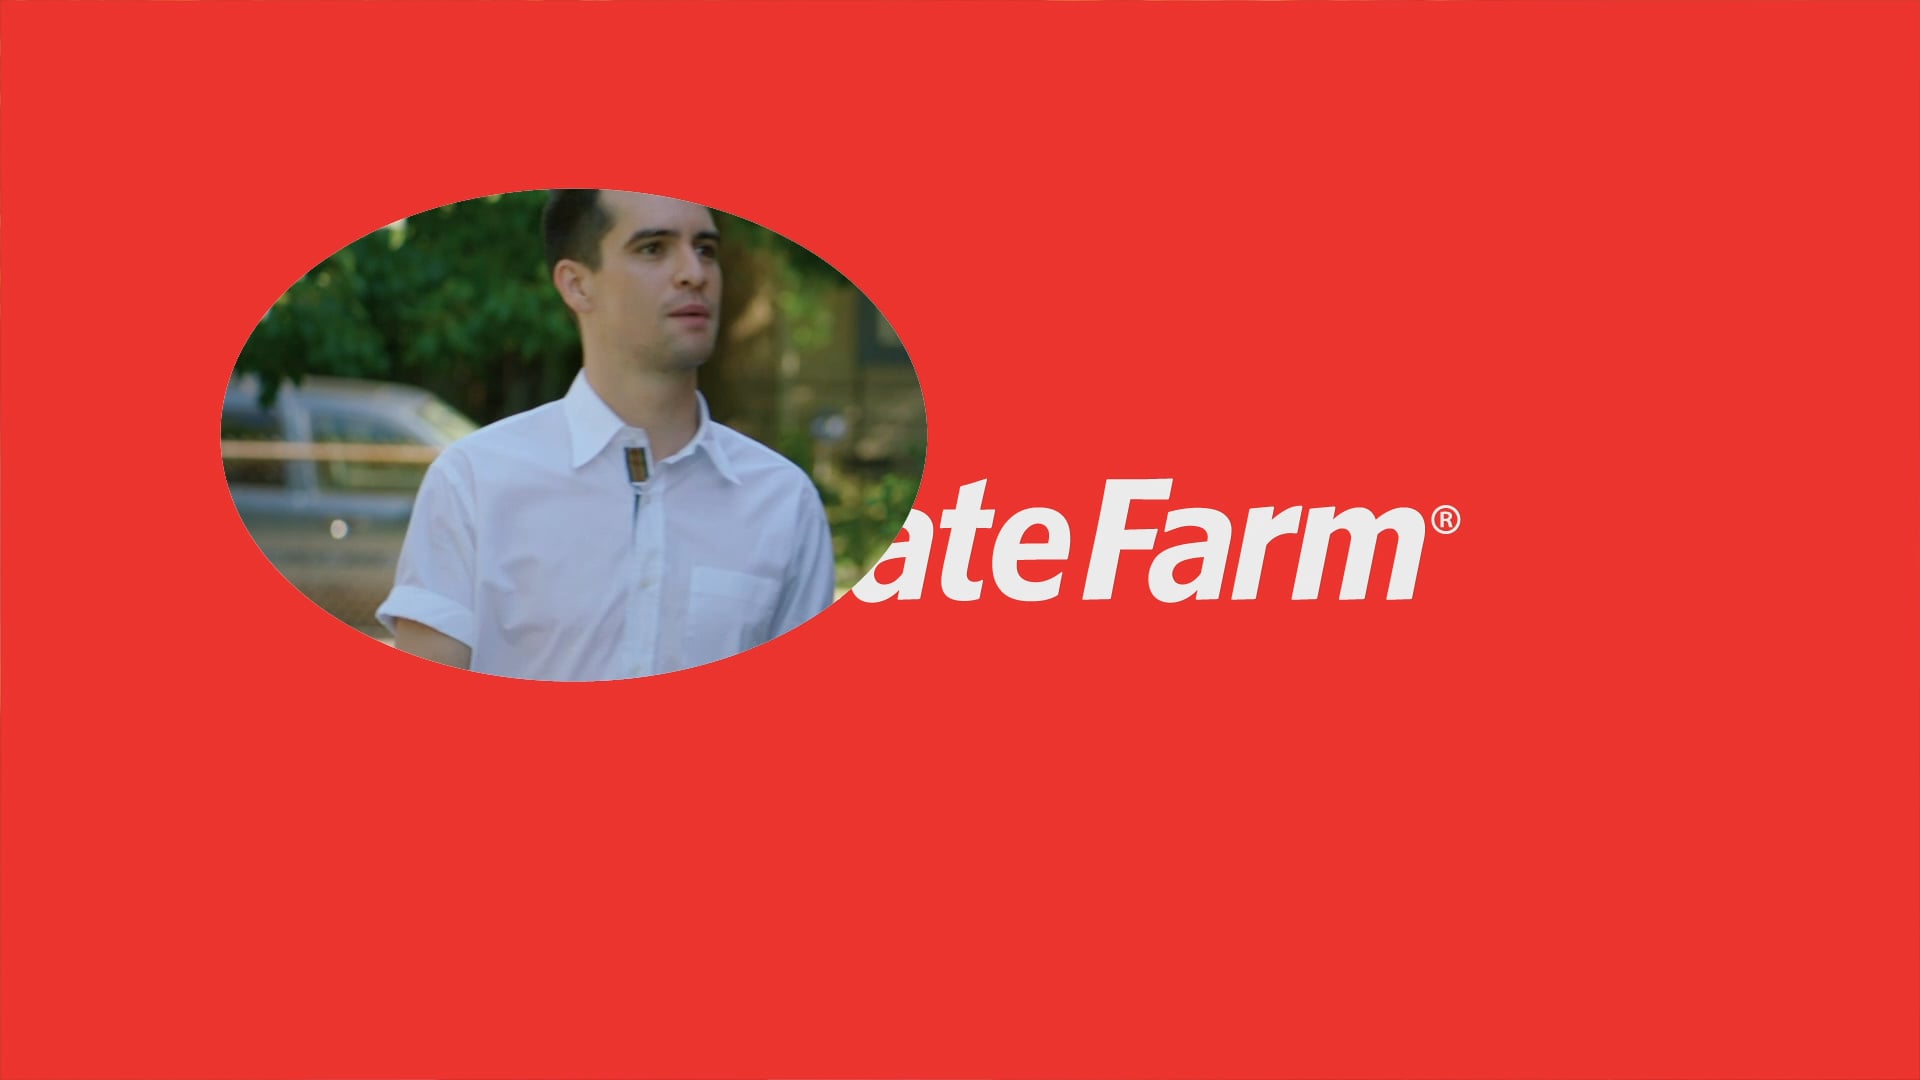 State Farm x Brendon Urie EP 2